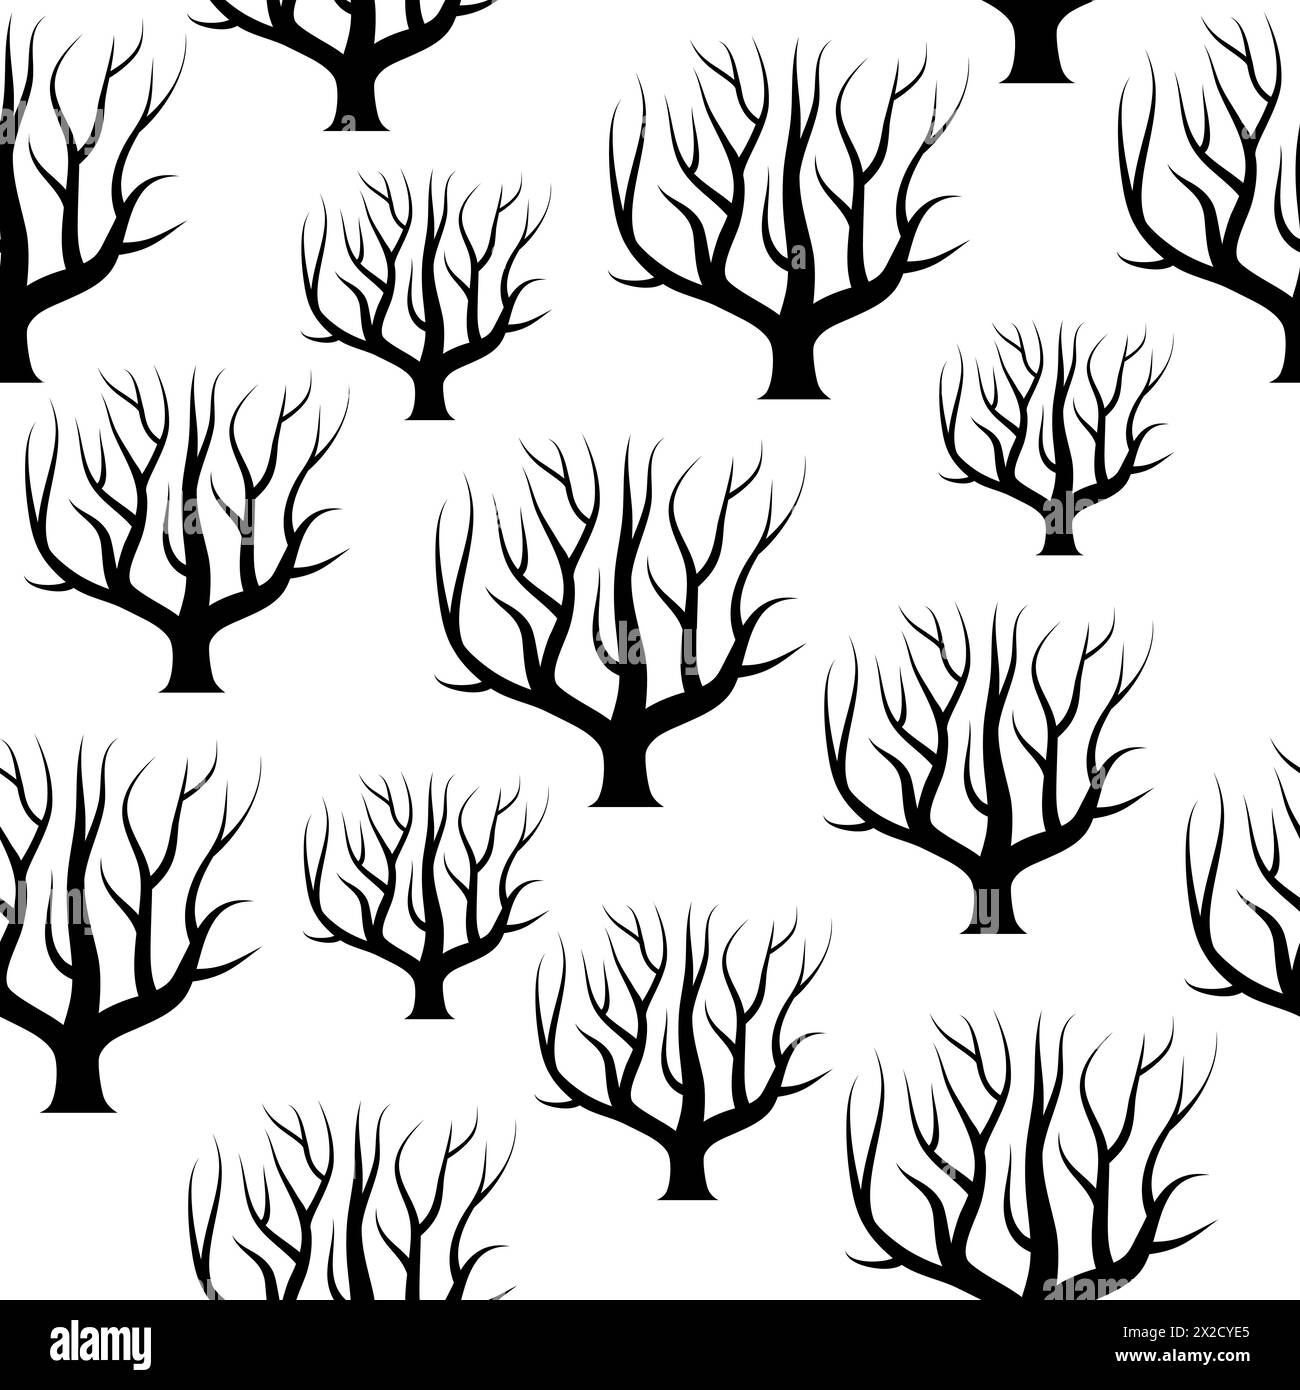 Seamless black and white curved trees without leaves backgrounds. Vector forest seamless texture. Stock Vector